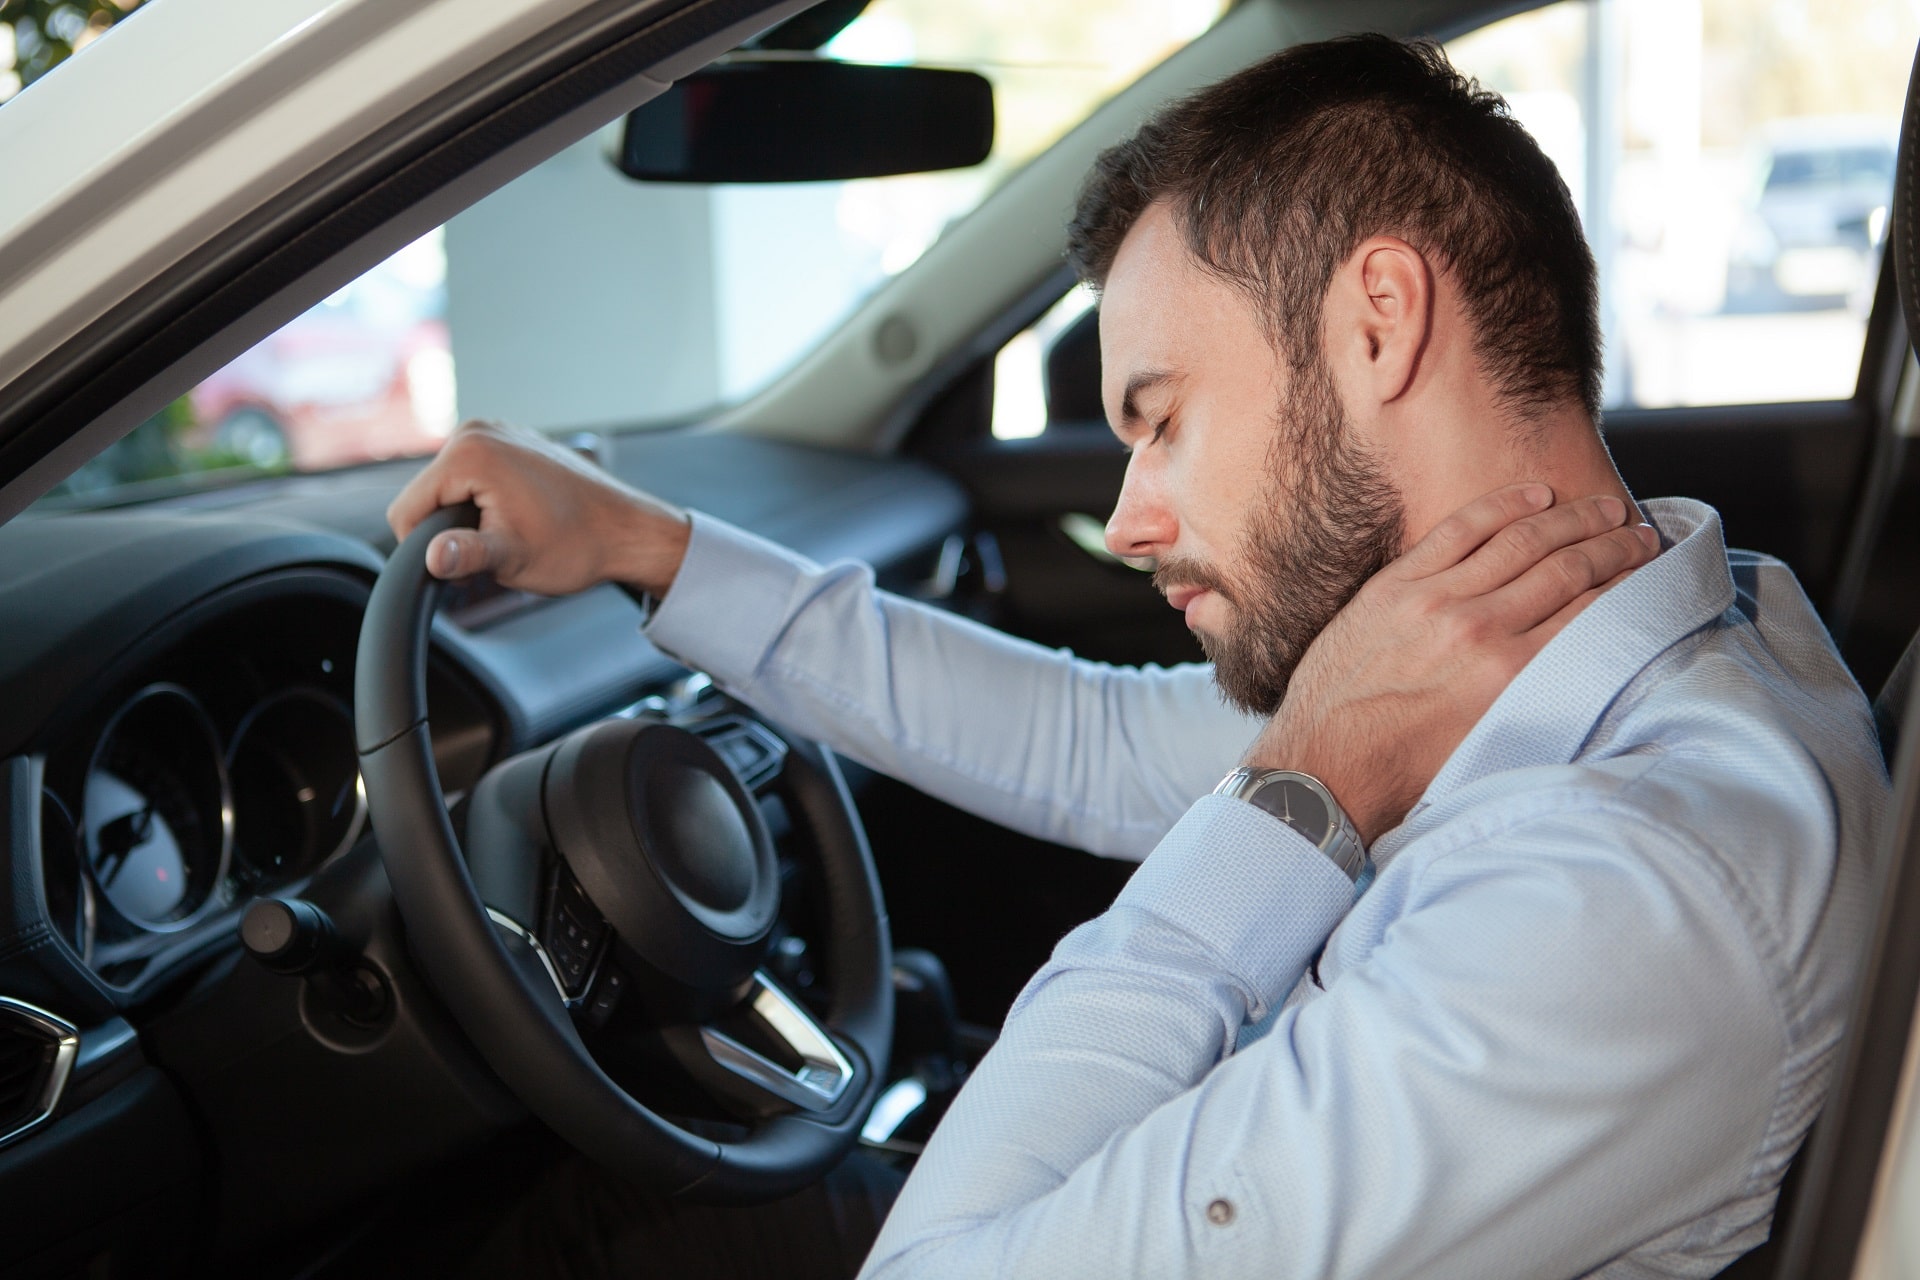 Types Of Pain And Suffering After An Auto Accident